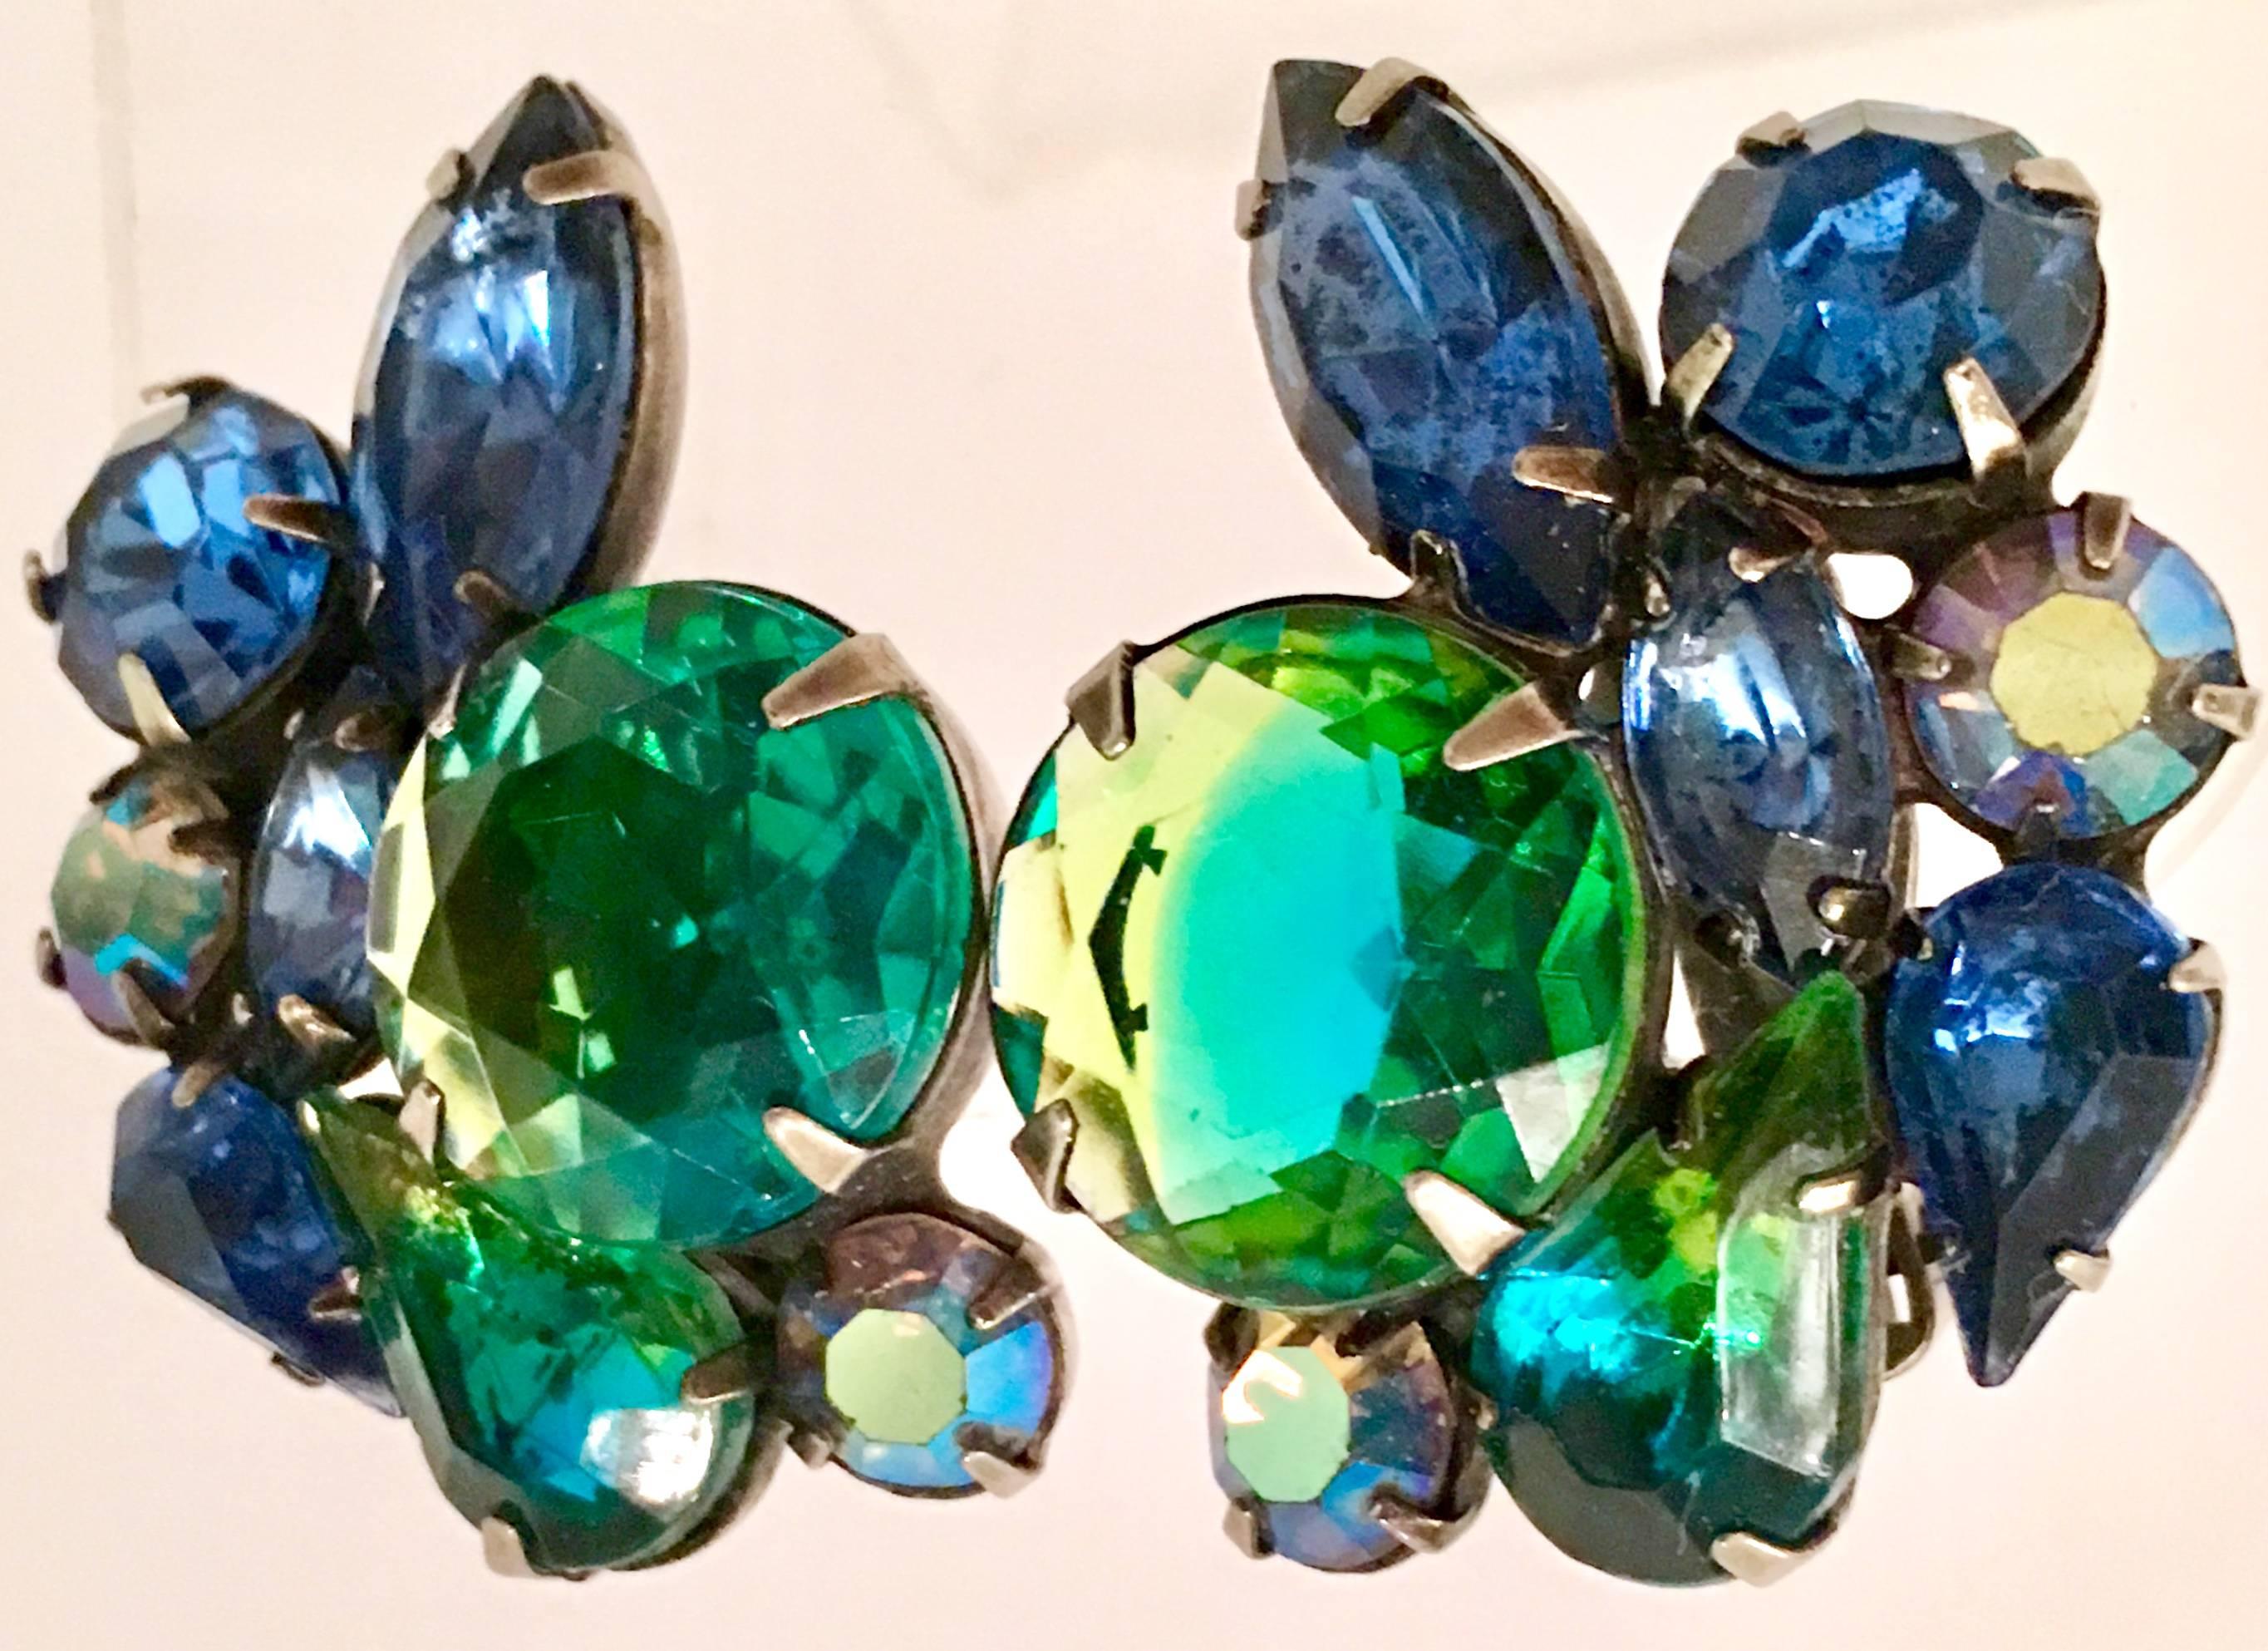 1950'S Silve & Swarovski Crystal Rhinestone Abstract Floral Earrings. Prong set in gunmetal silver tone metal, these brilliant cut and faceted blue, green and aurora borealis crystal rhinestone earrings have a 